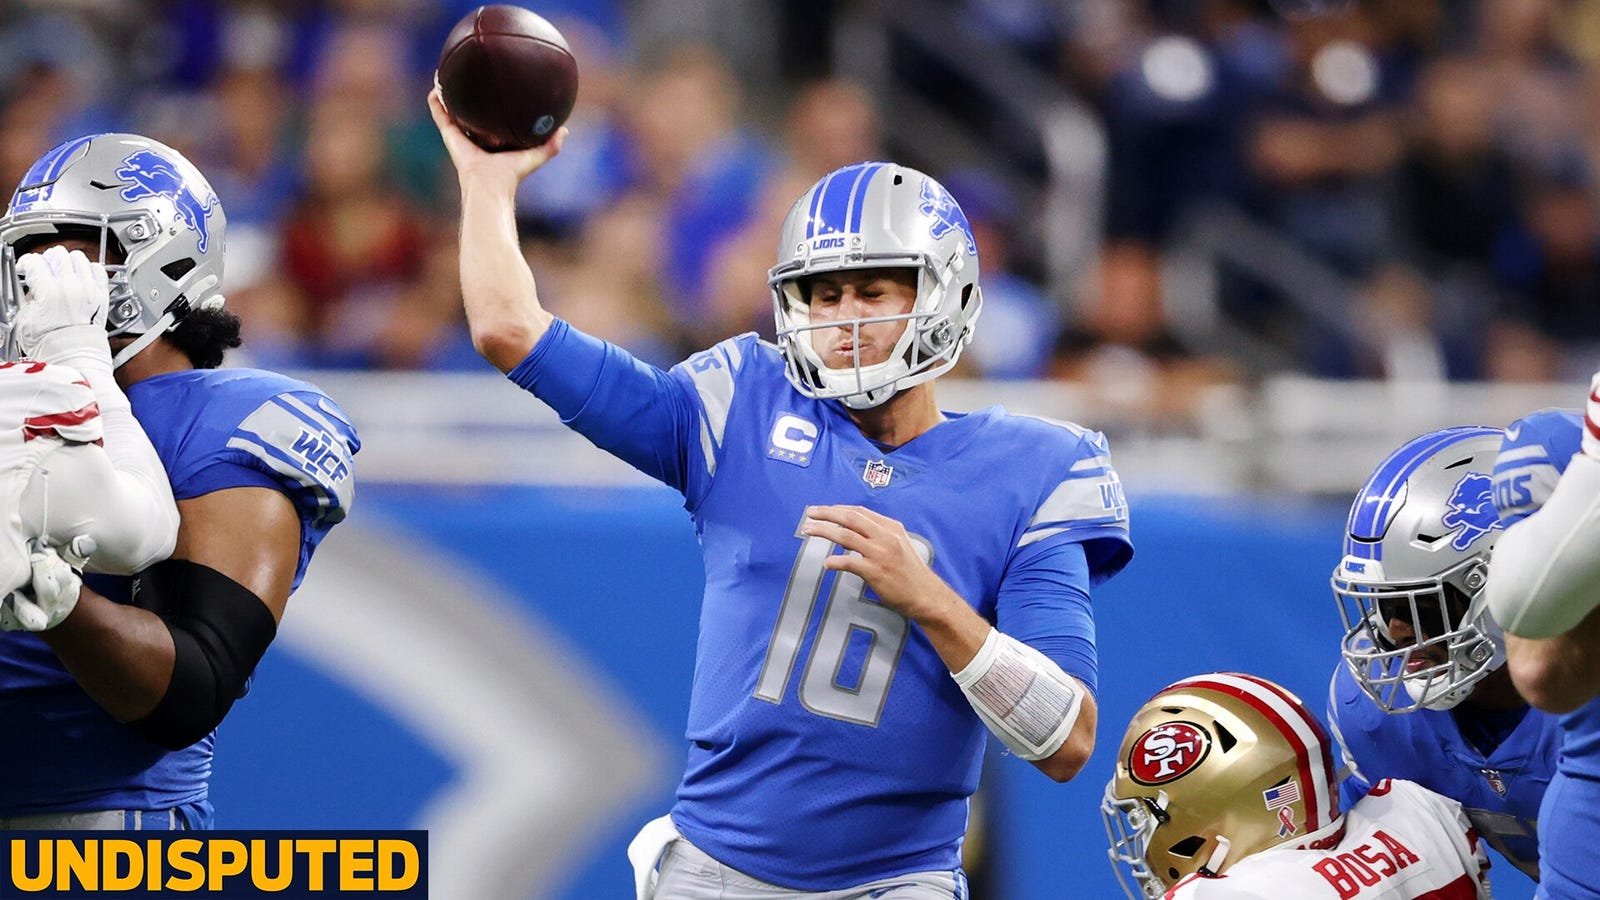 49ers host Lions in NFC Championship Game: who wins?